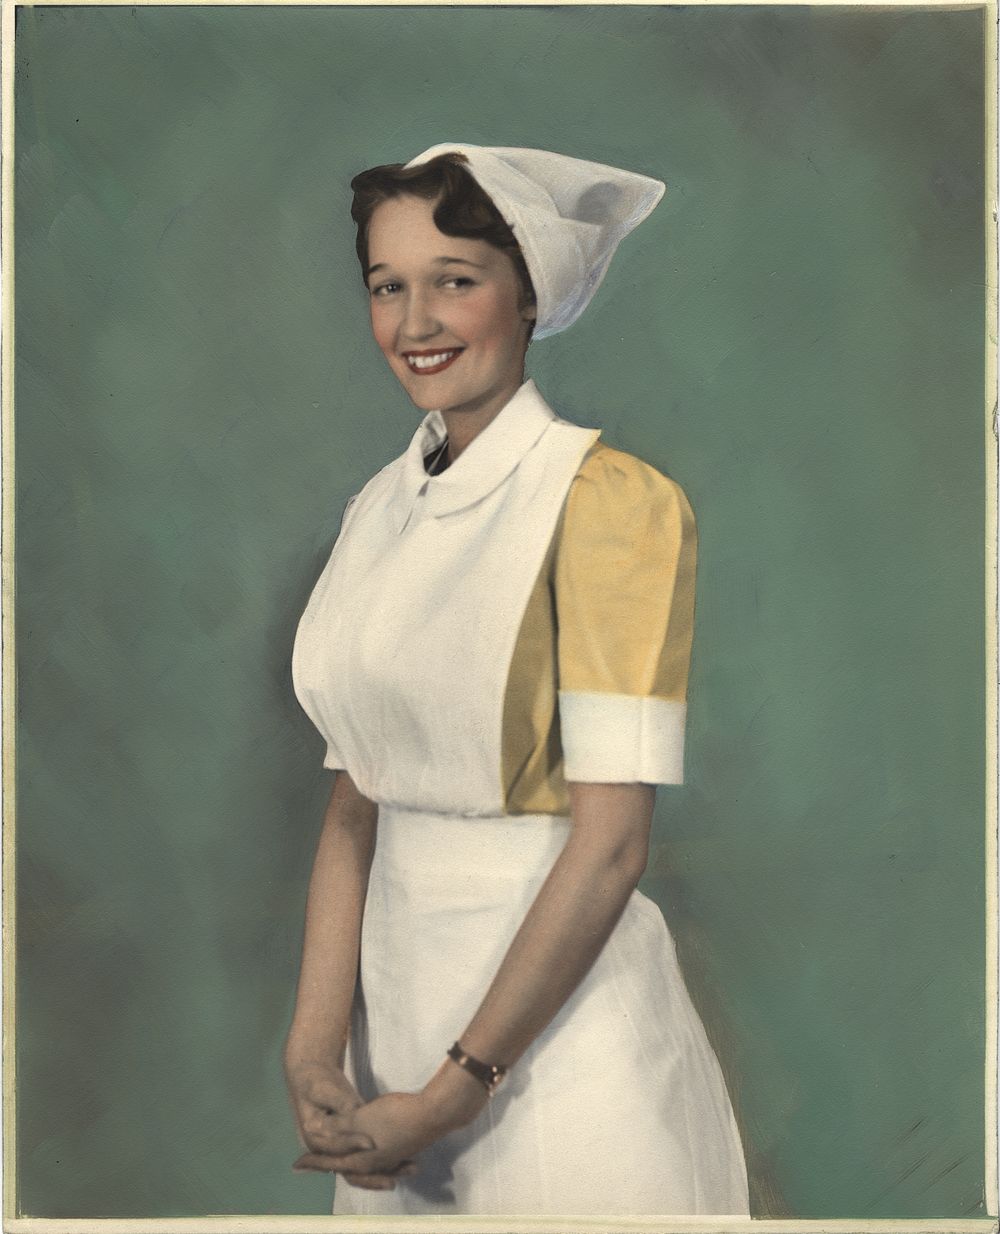 Nurse wearing Uniform from EnglandCollection: Images from the History of Medicine (IHM) between 1961 and 1963 